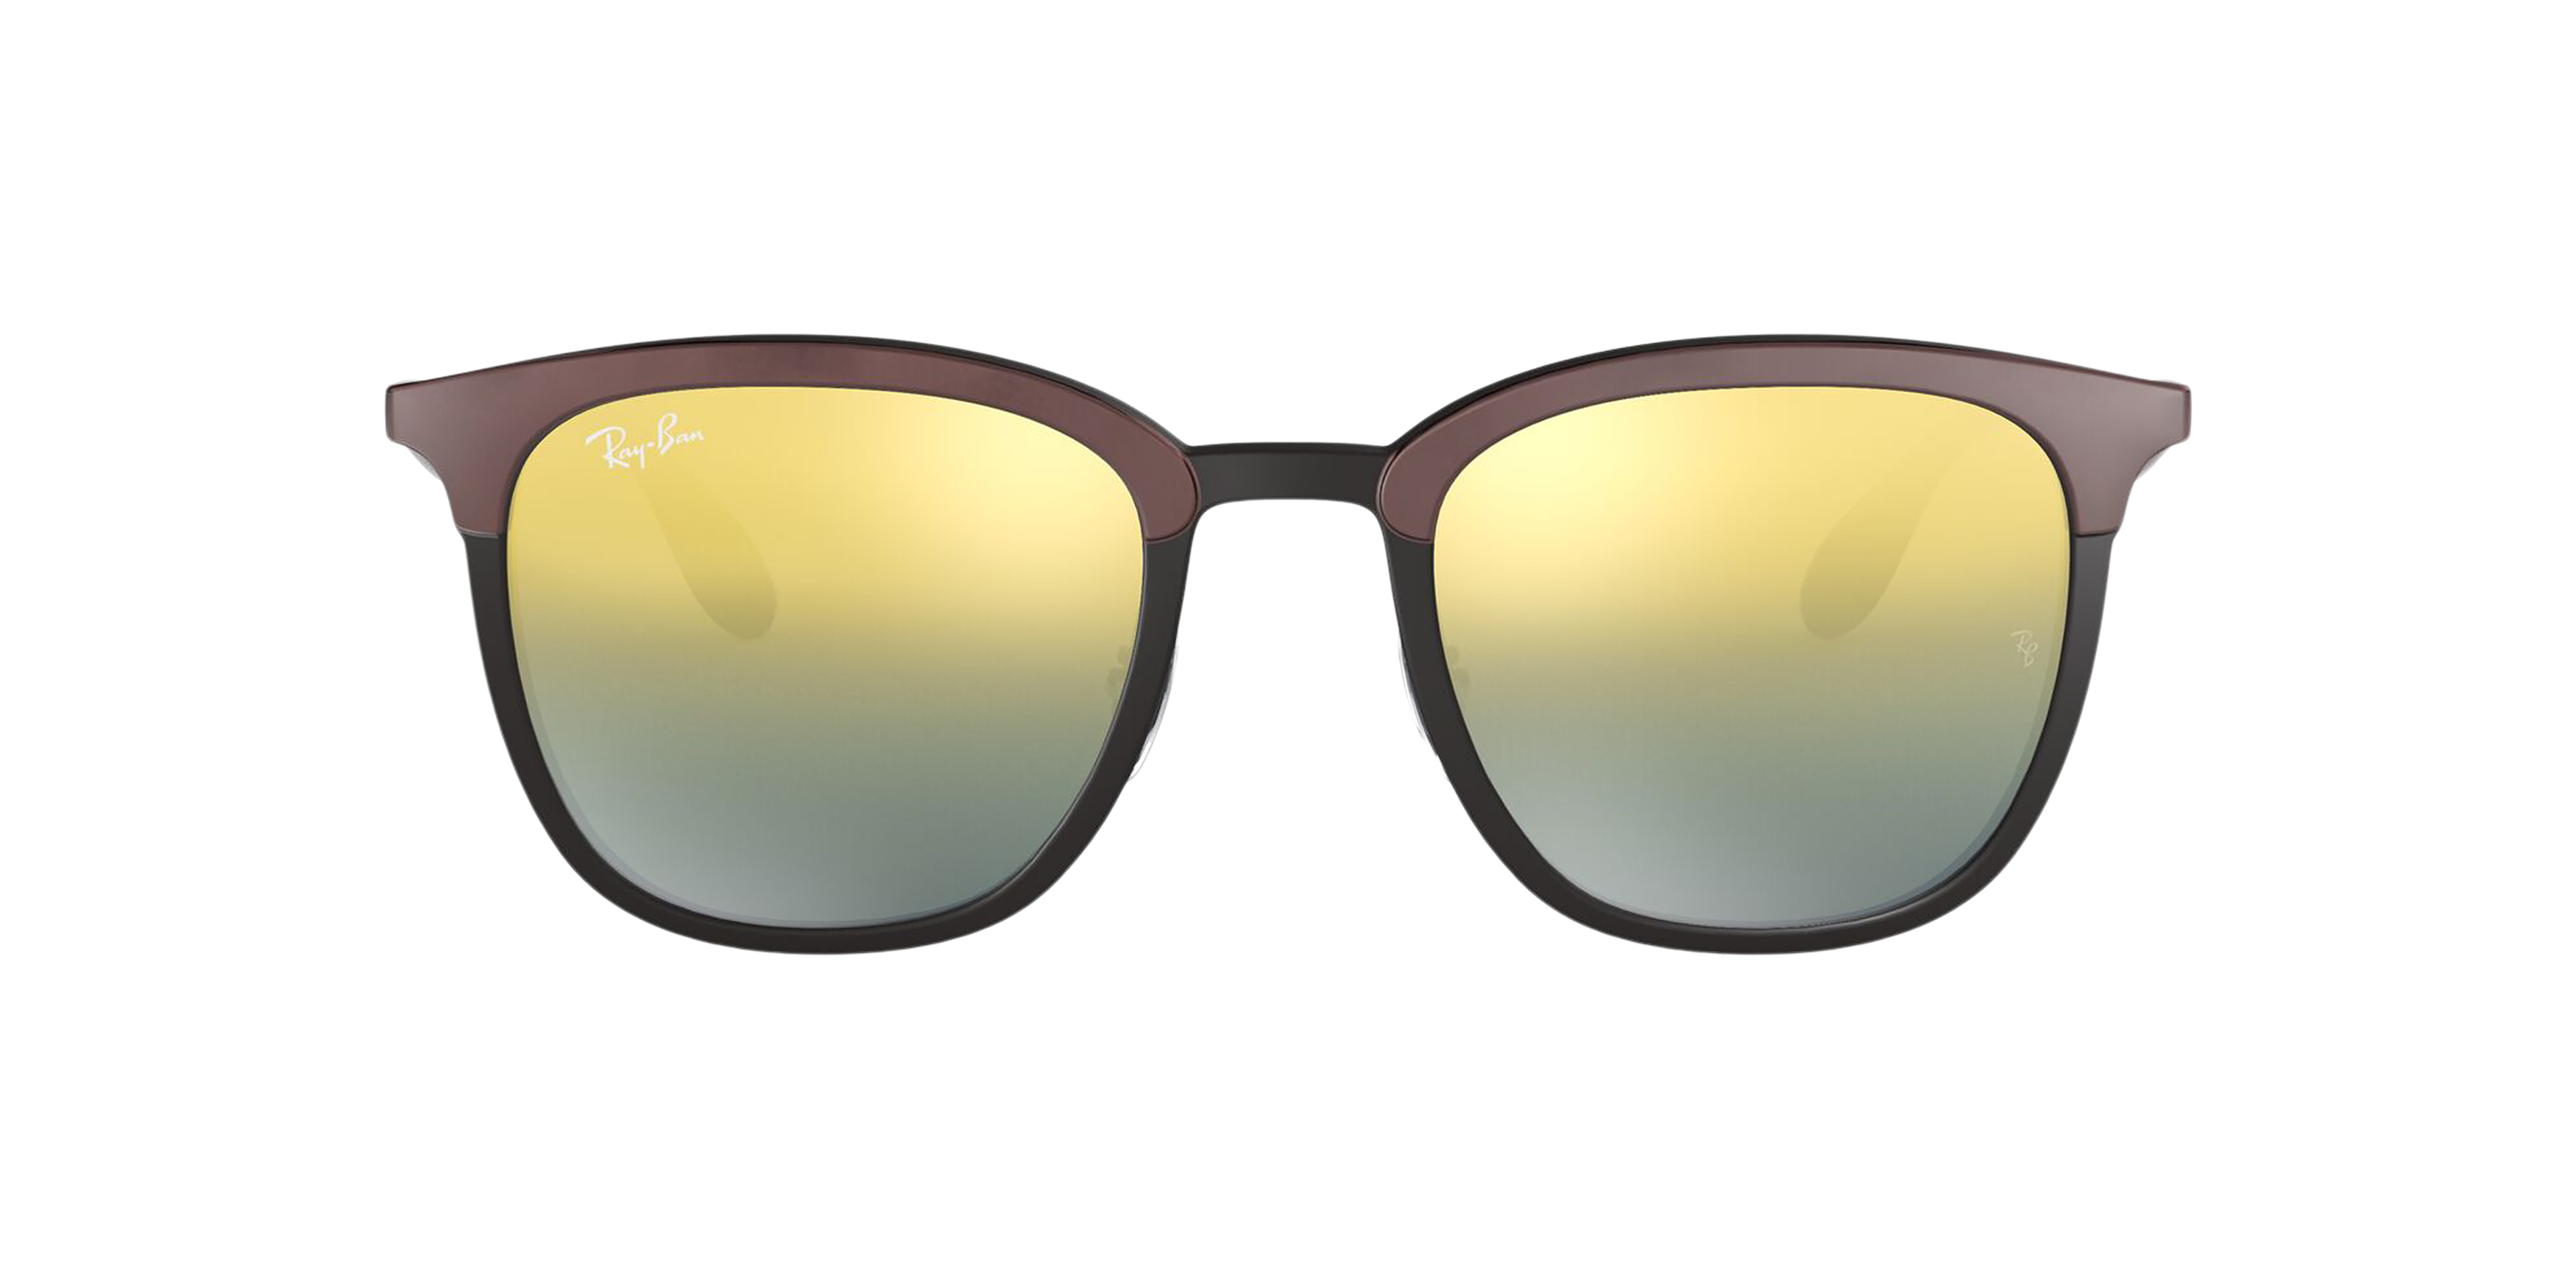 [products.image.front] Ray-Ban RB4278 6285A7